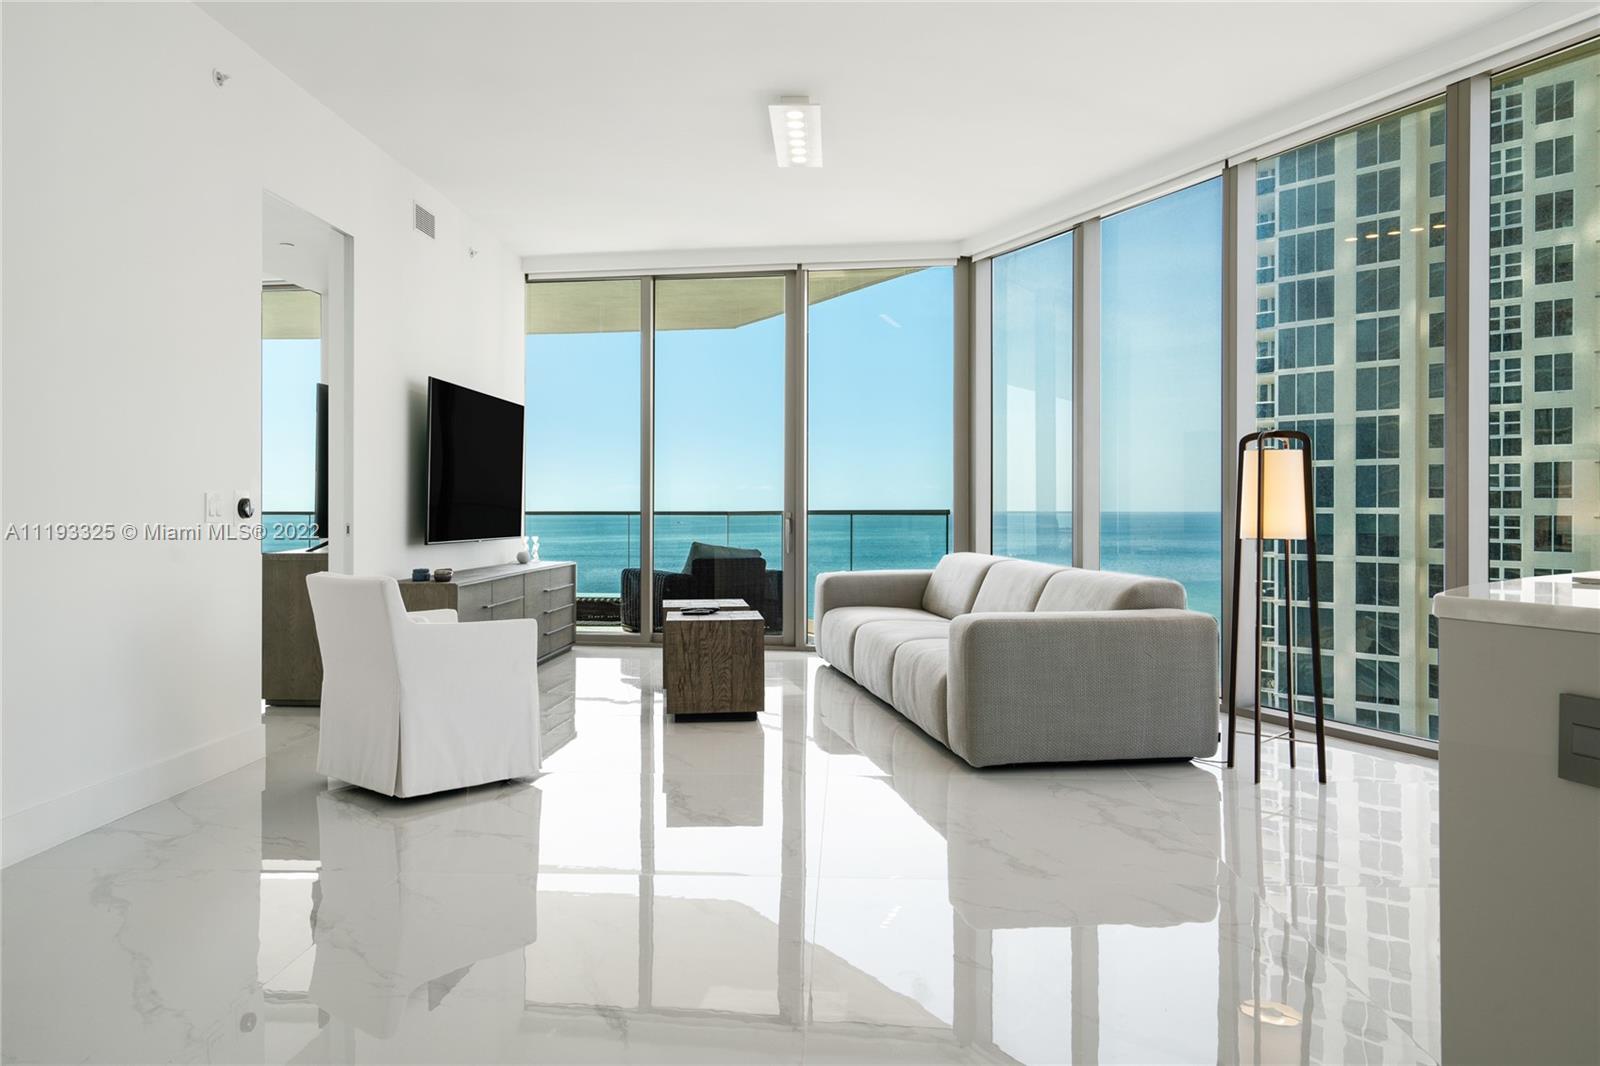 Stunning 2 bedrooms & 2.5 bathrooms residence with breathtaking views of the ocean and city skyline. Newly built, Armani Casa Residences is the most elegant address in Sunny Isles. 11th floor, 10" ft ceilings, surrounded with floor to ceiling windows. Corner unit with deep terraces and outdoor summer kitchen. Chefs kitchen by Armani Dada and state of the art appliances. Resort like amenities with beach & pool service, spa, oceanfront restaurant, movie theatre, fitness center, game room, yoga room, prive lounge and much more.